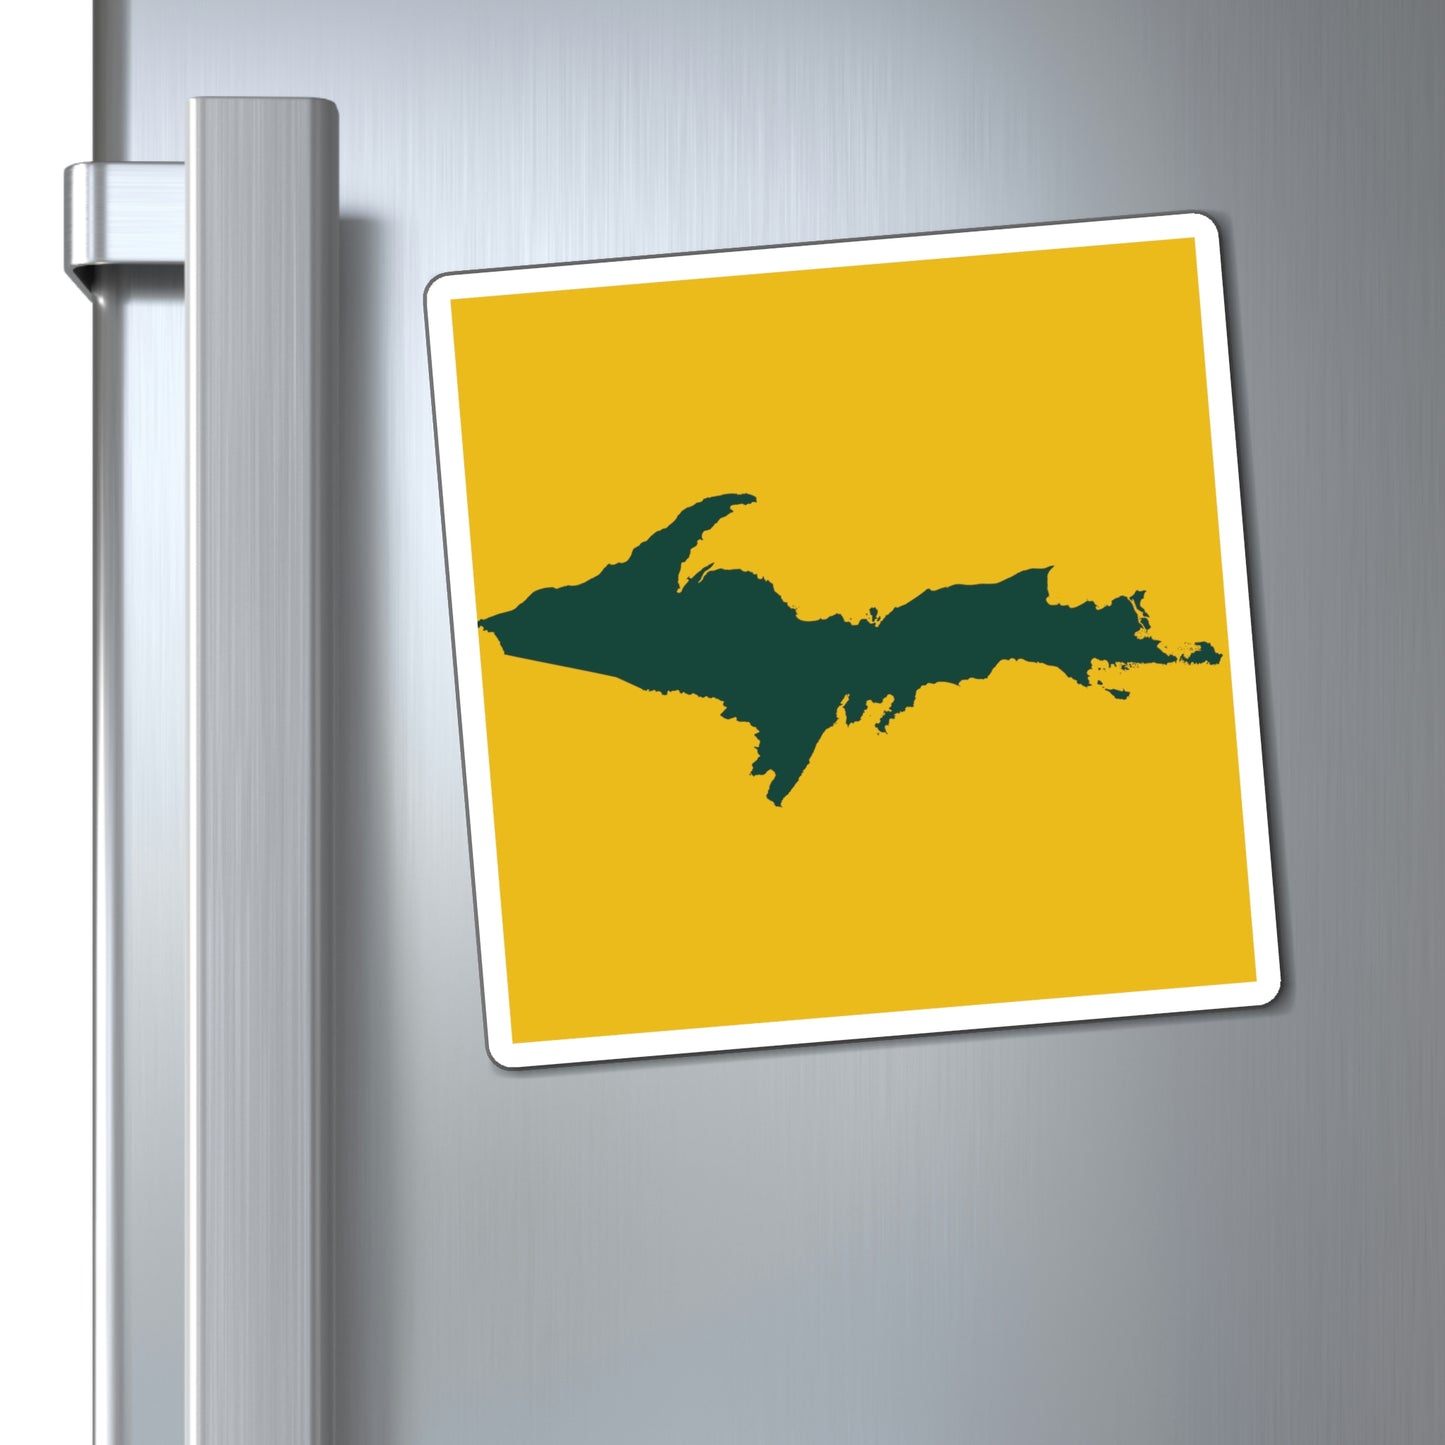 Michigan Upper Peninsula Square Magnet (Gold w/ Green UP Outline)